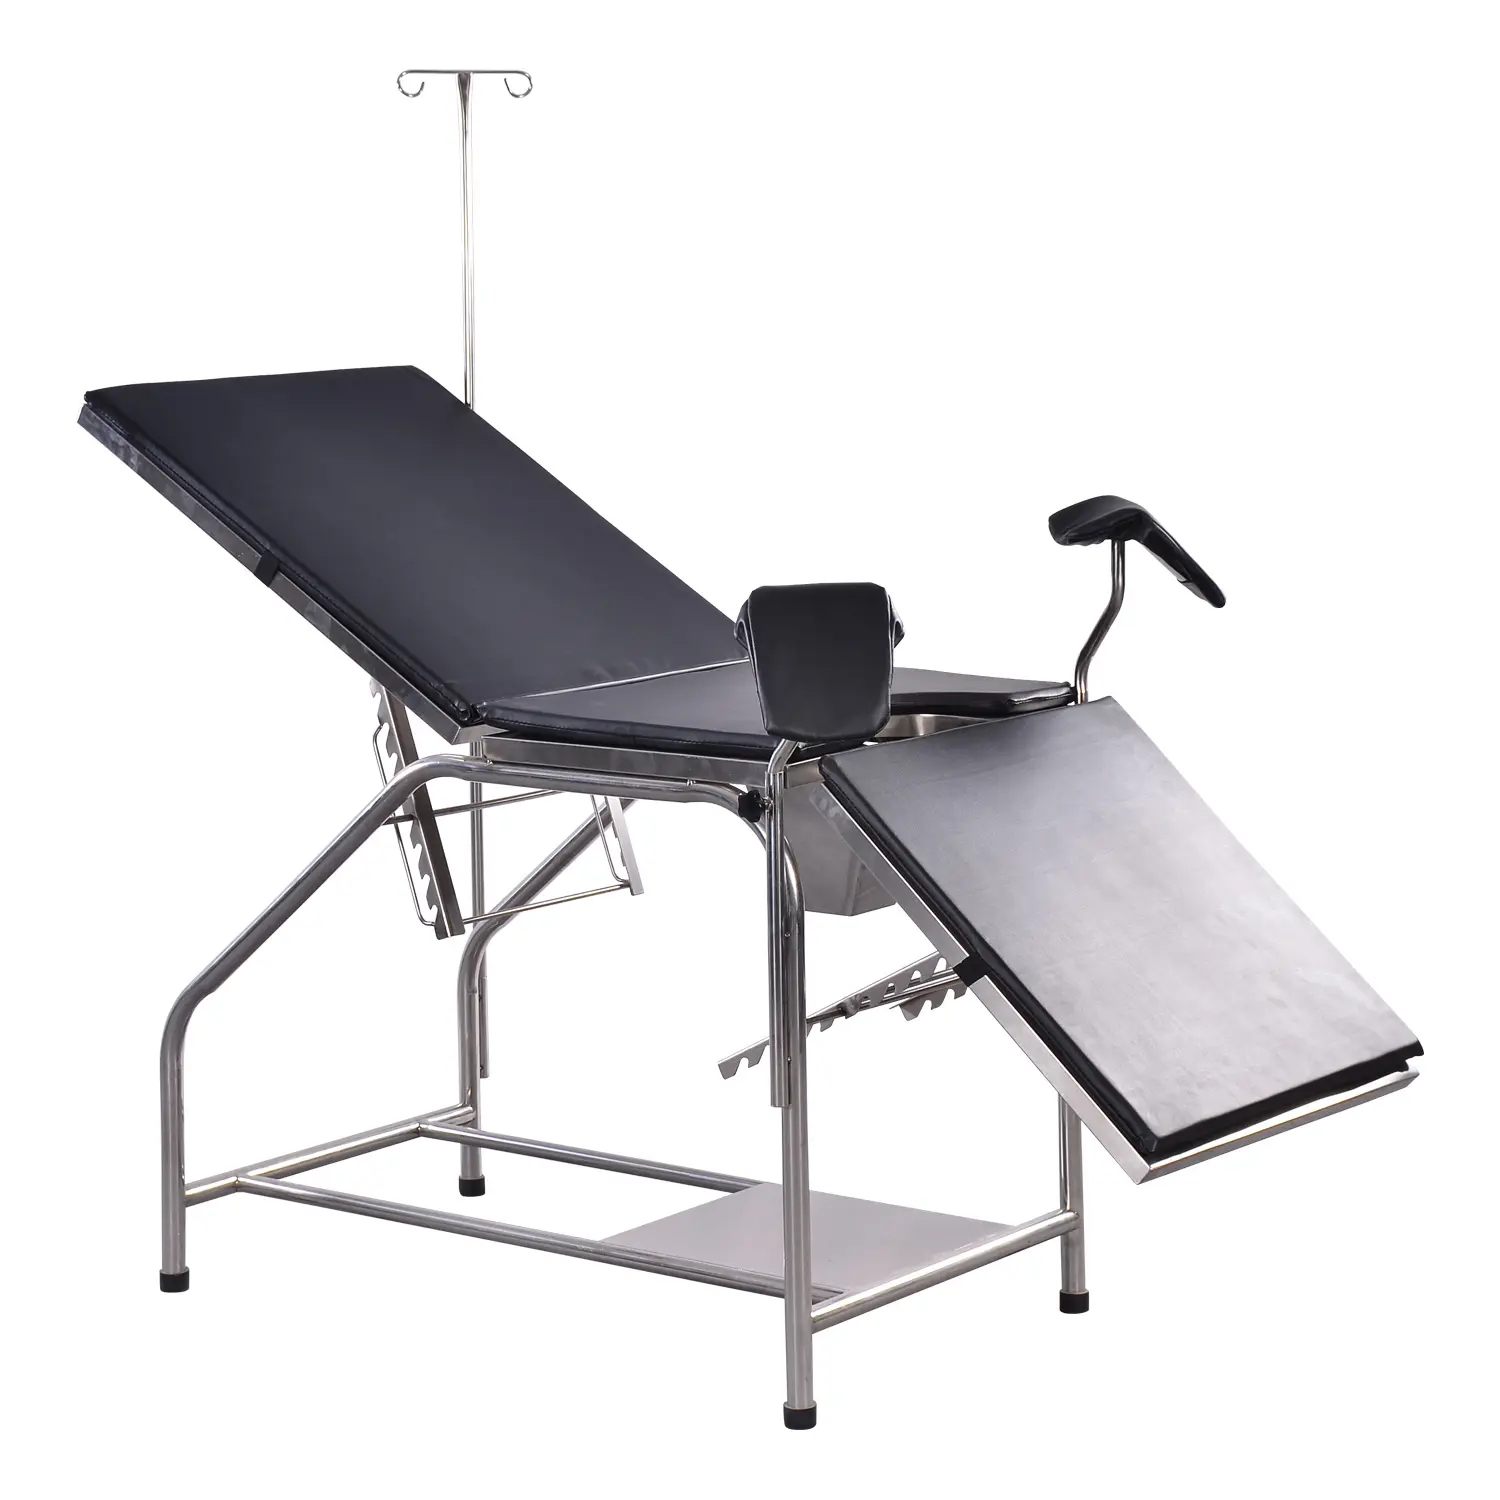 Electric Hospital Surgical Examination Table Icu Thrombolytic Bed Multi-functional Hospital Bed